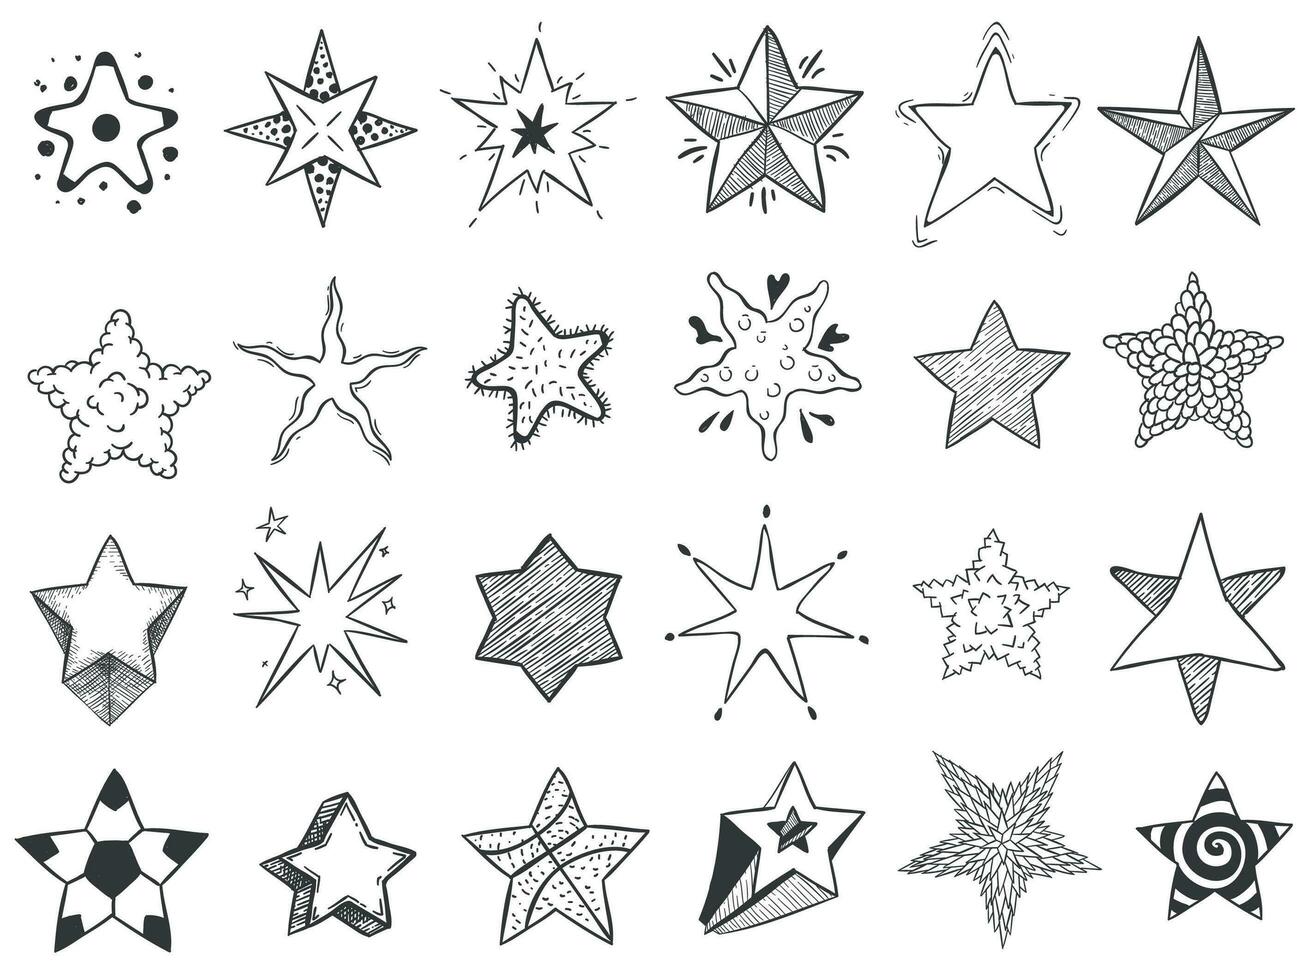 Sketch stars. Doodle star shape, cute hand drawn starburst and rating stars vector set